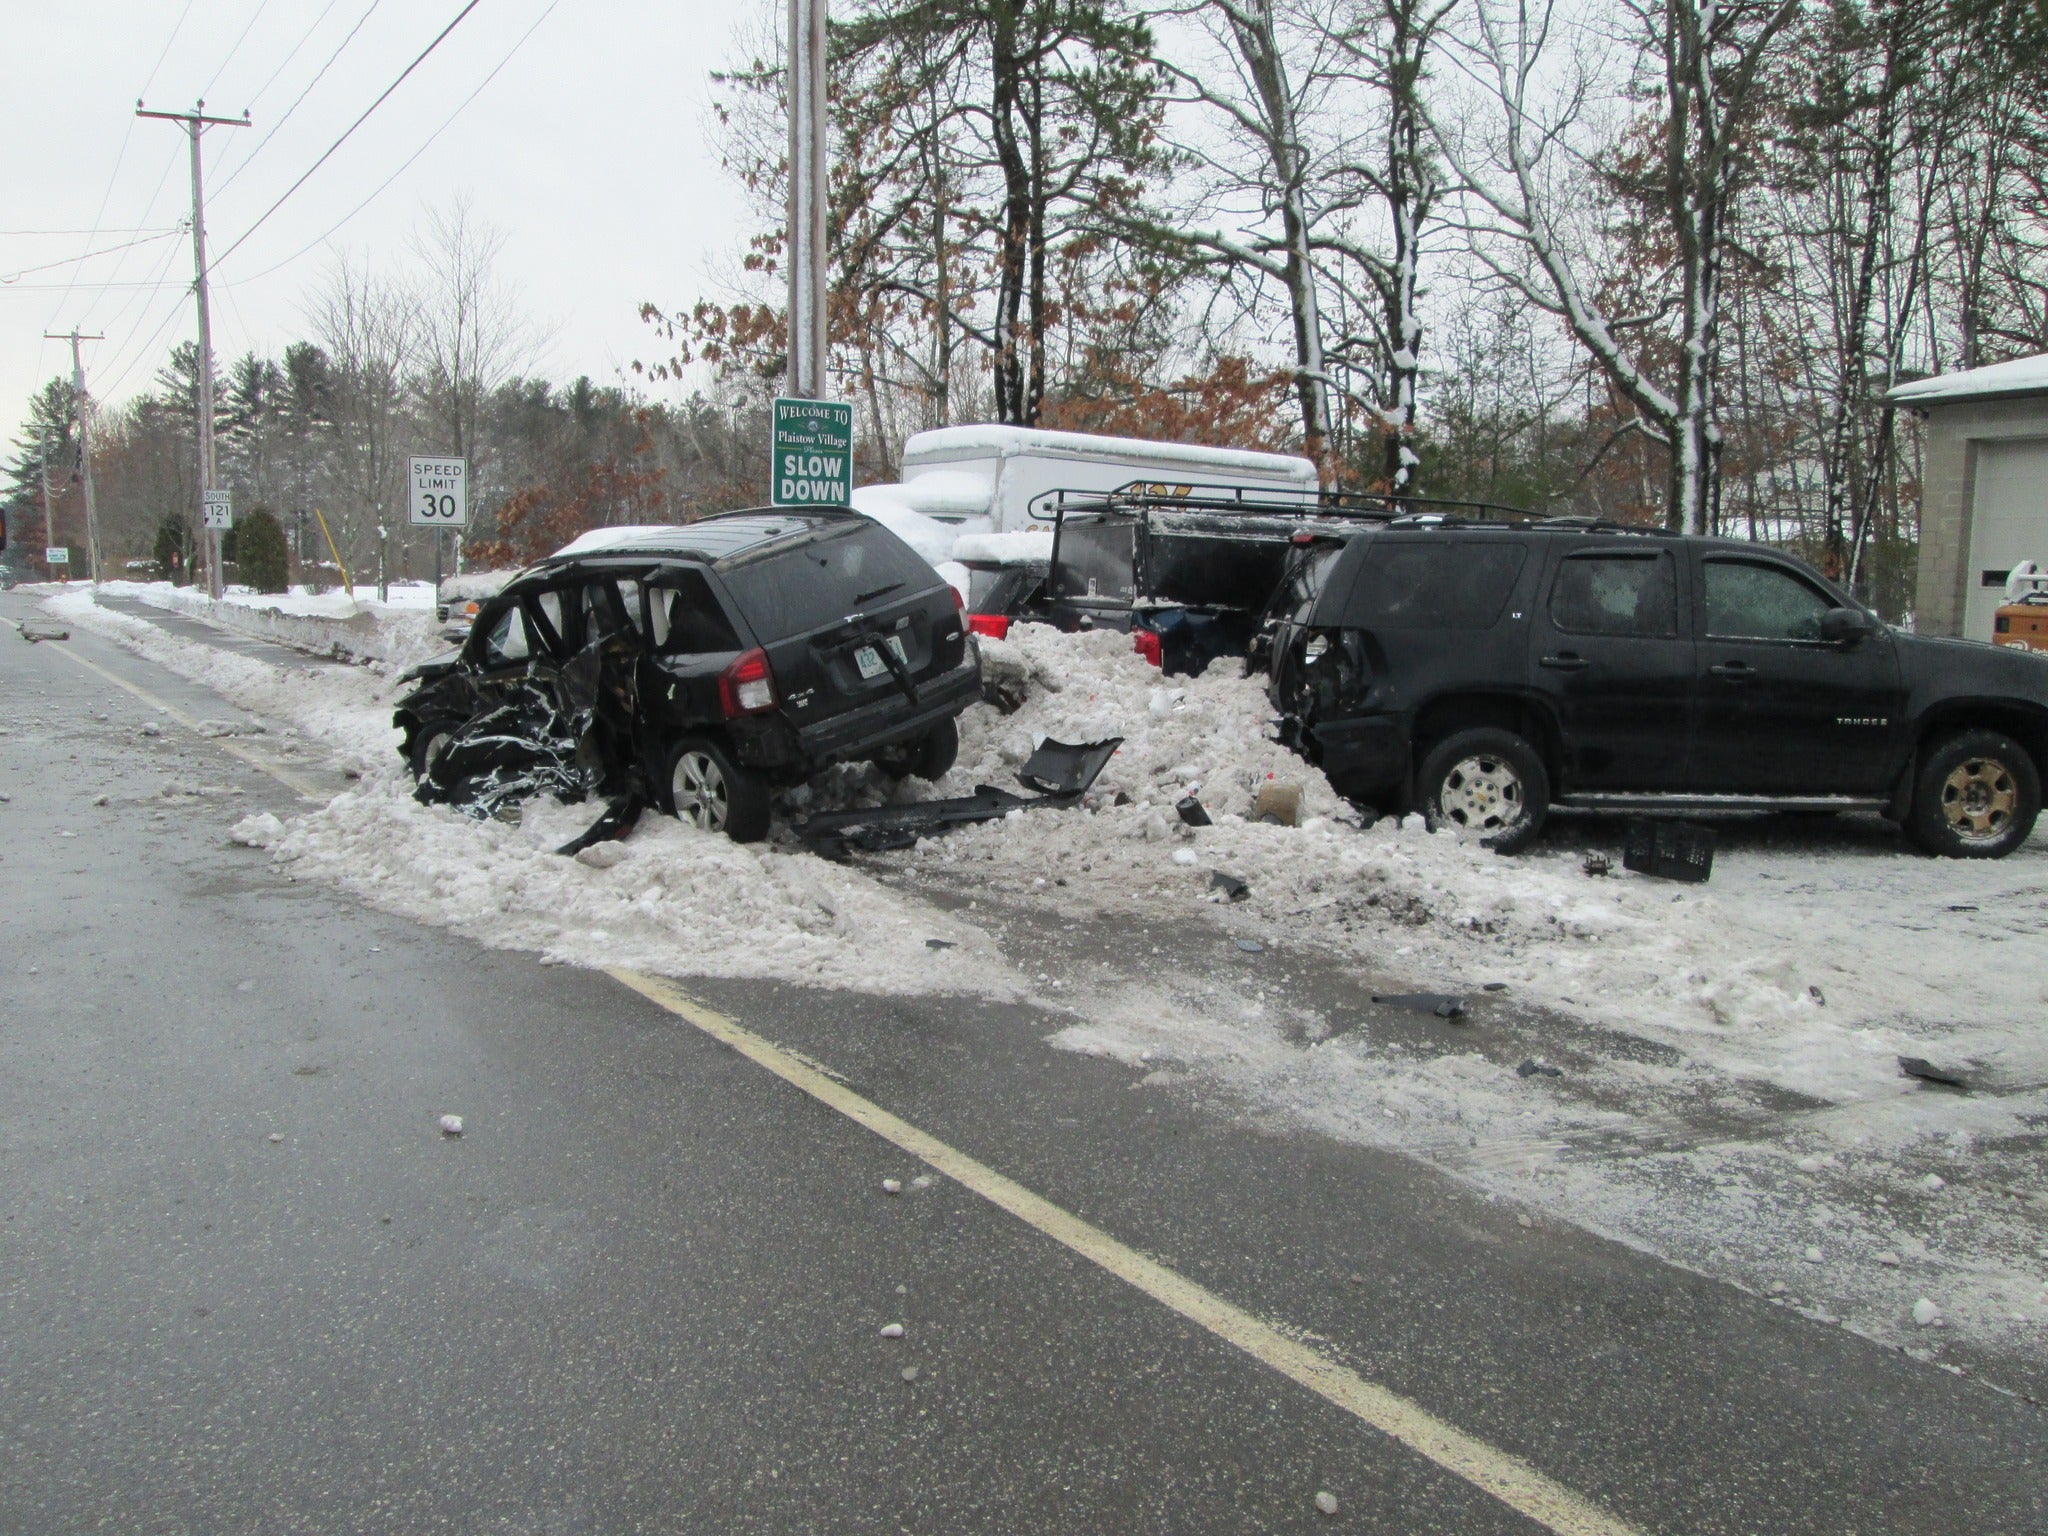 alt = a damaged black Jeep Compass pictured after a crash on a snowbank, next a green sign that reads "Welcome to Plaistow Village. Slow down." and other parked cars with visible damage. The crash took place in the area of Route 125 and Route 121A in Plaistow, New Hampshire.